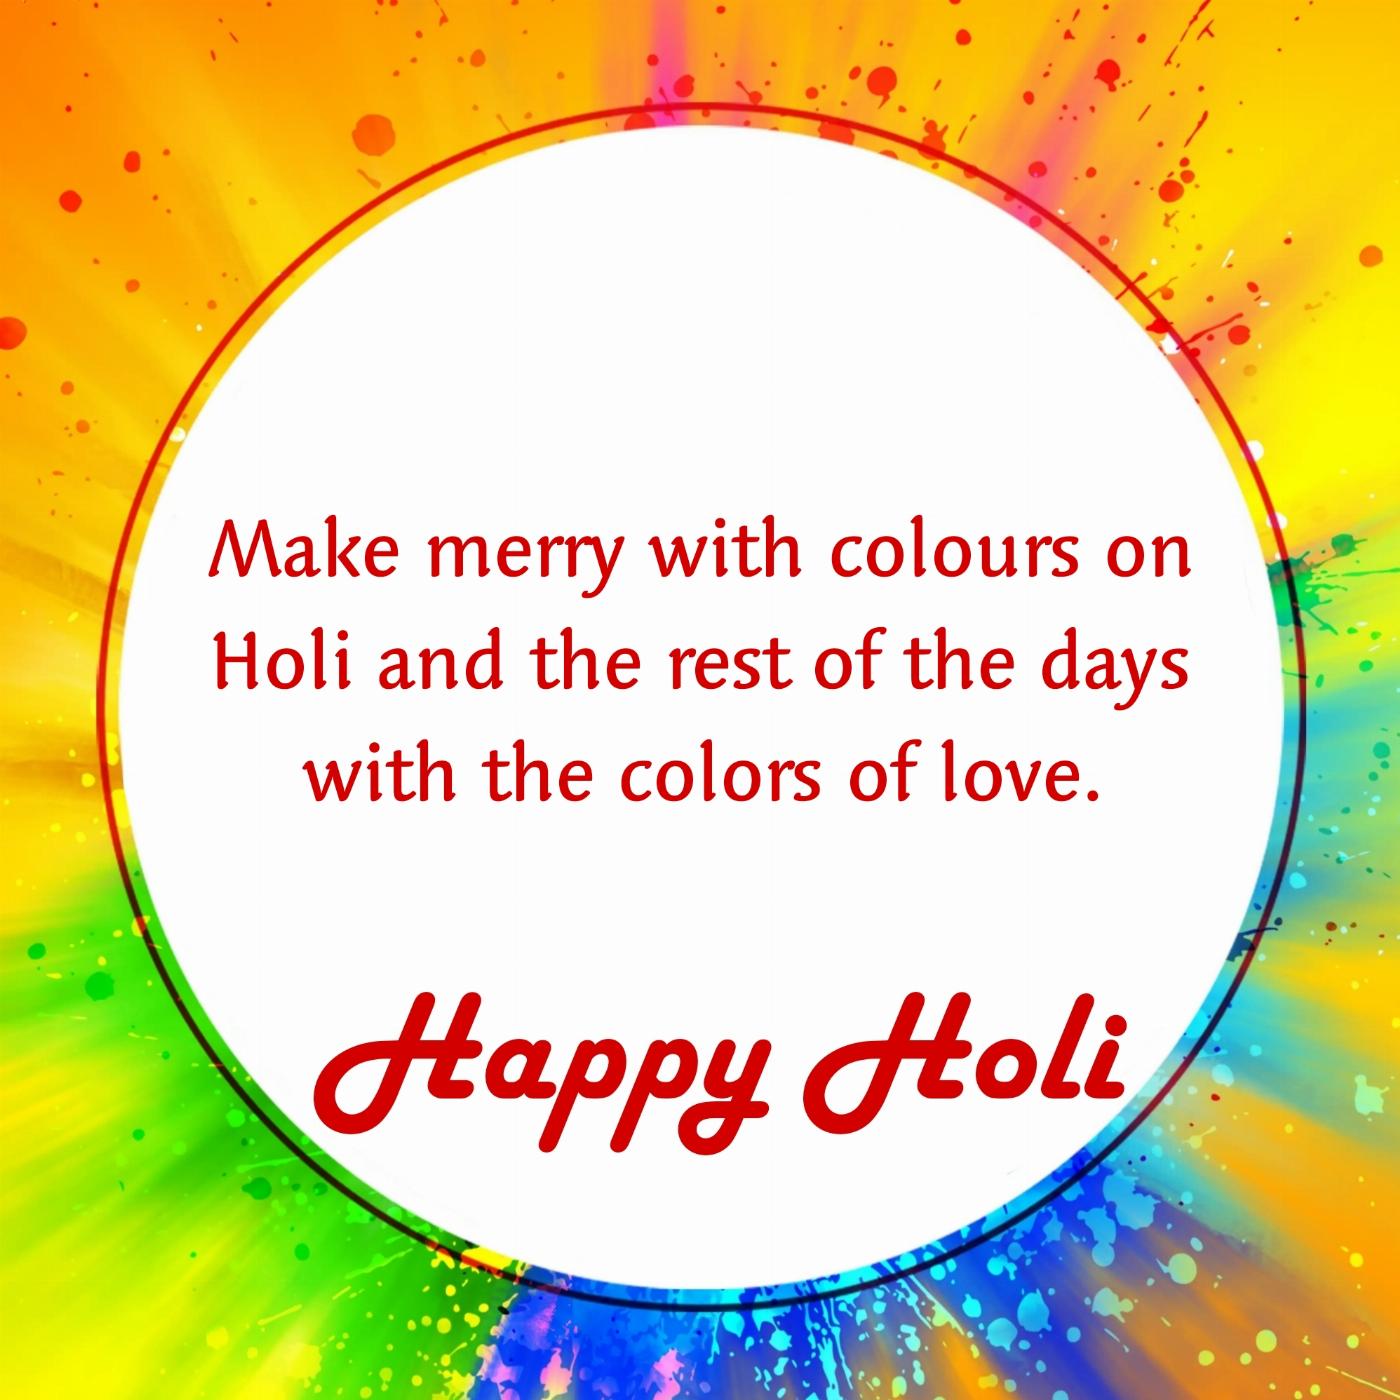 Make merry with colors on Holi and the rest of the days with the colors of love